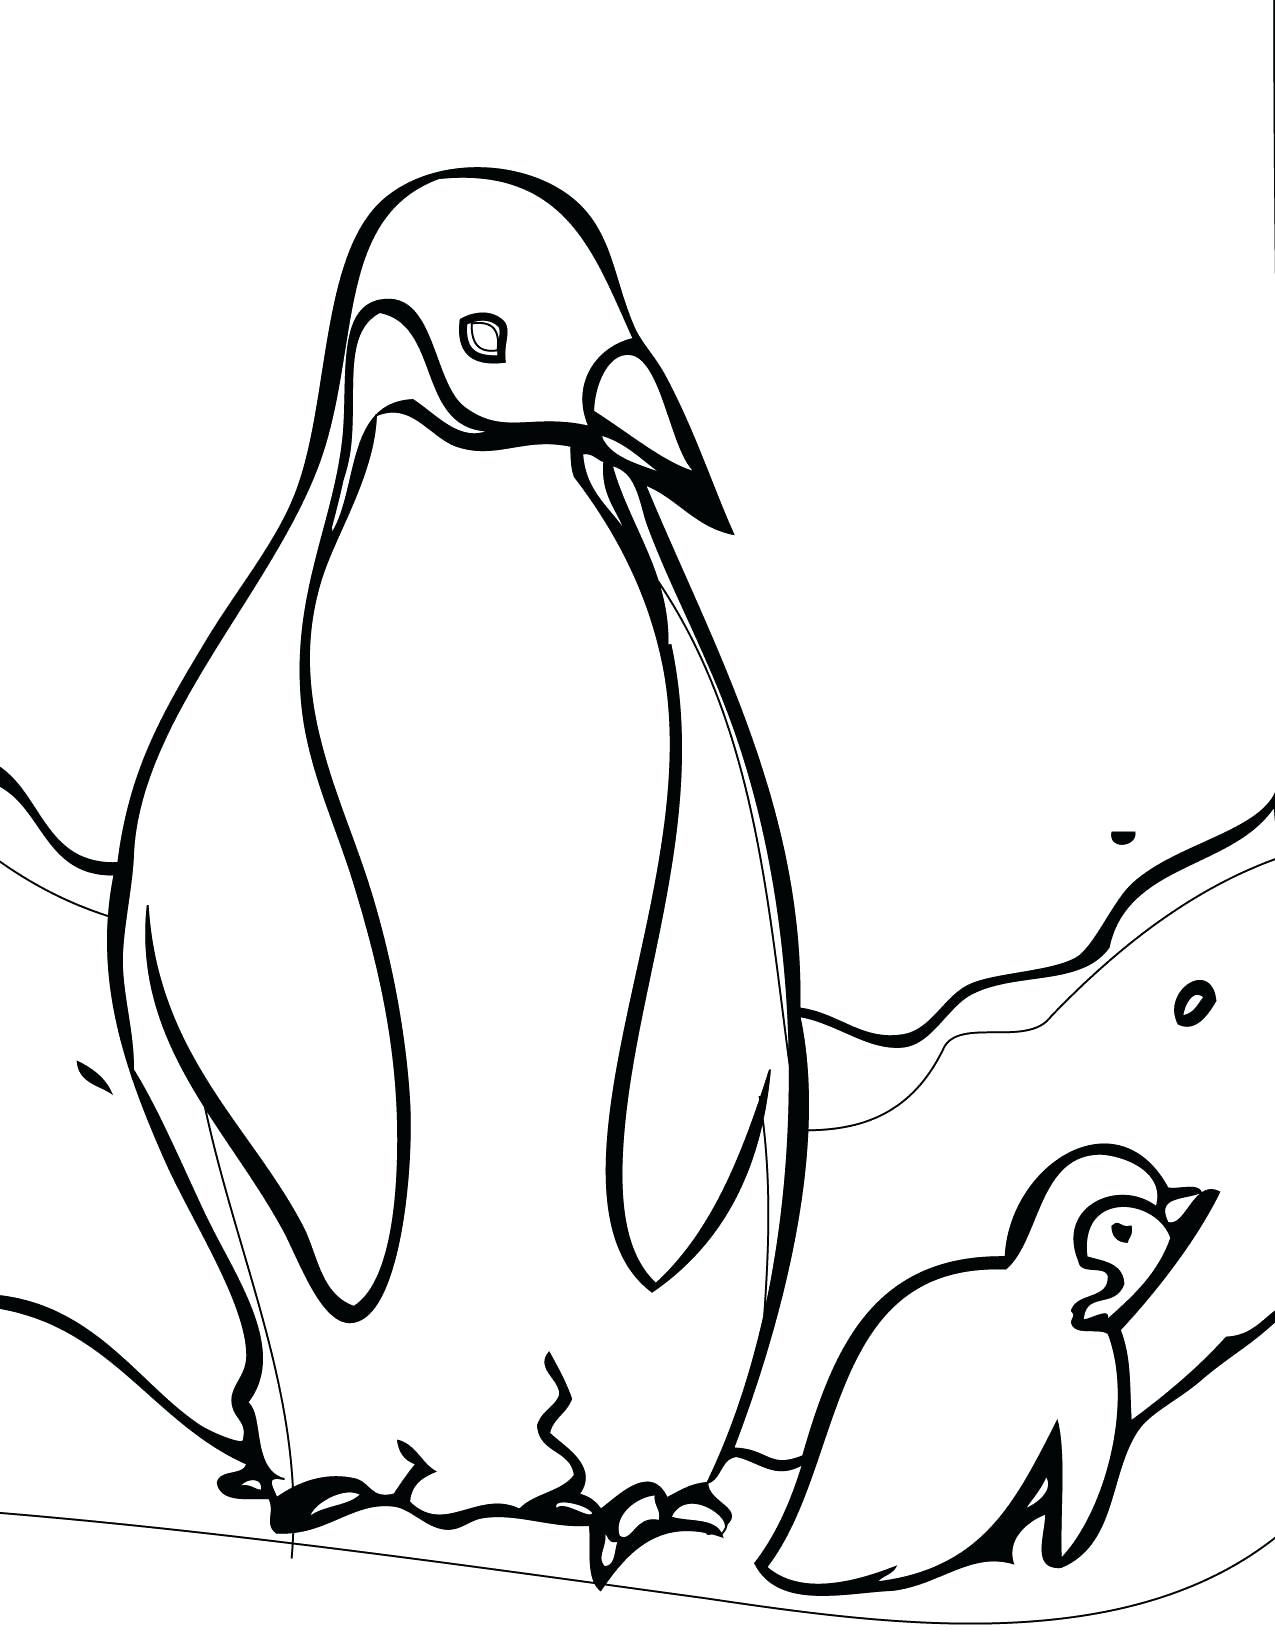 Penguin Card Template.pdf Cutting Files Christmas Crafts For Free